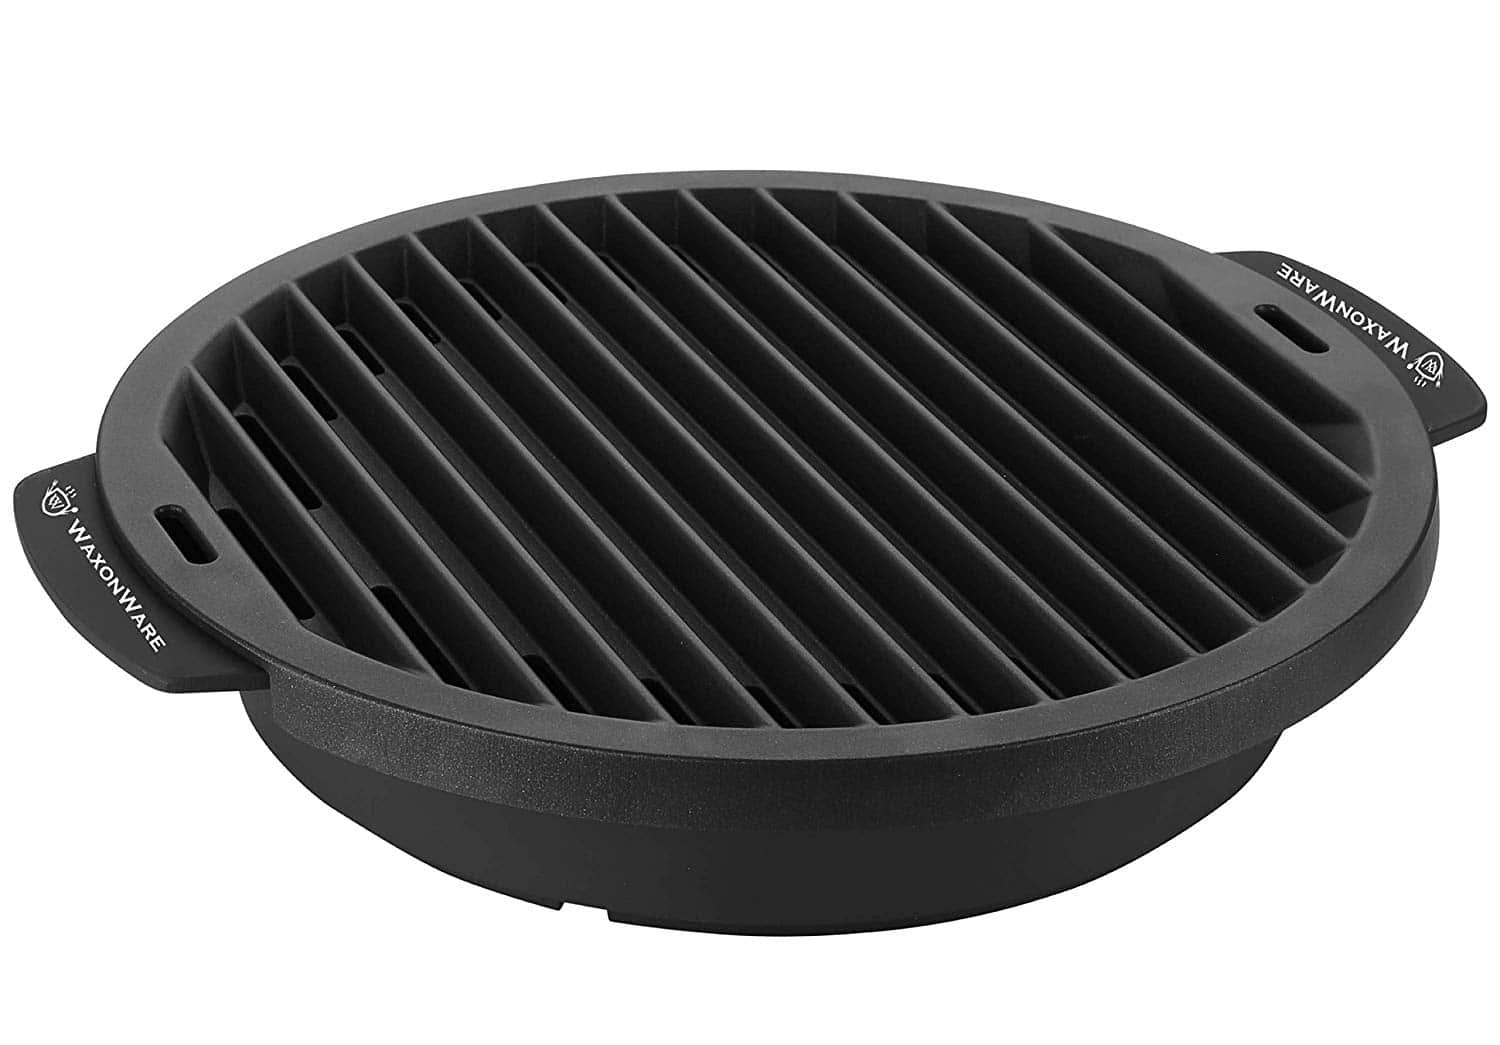 WaxonWare Nonstick Grill Pan for Stove Top